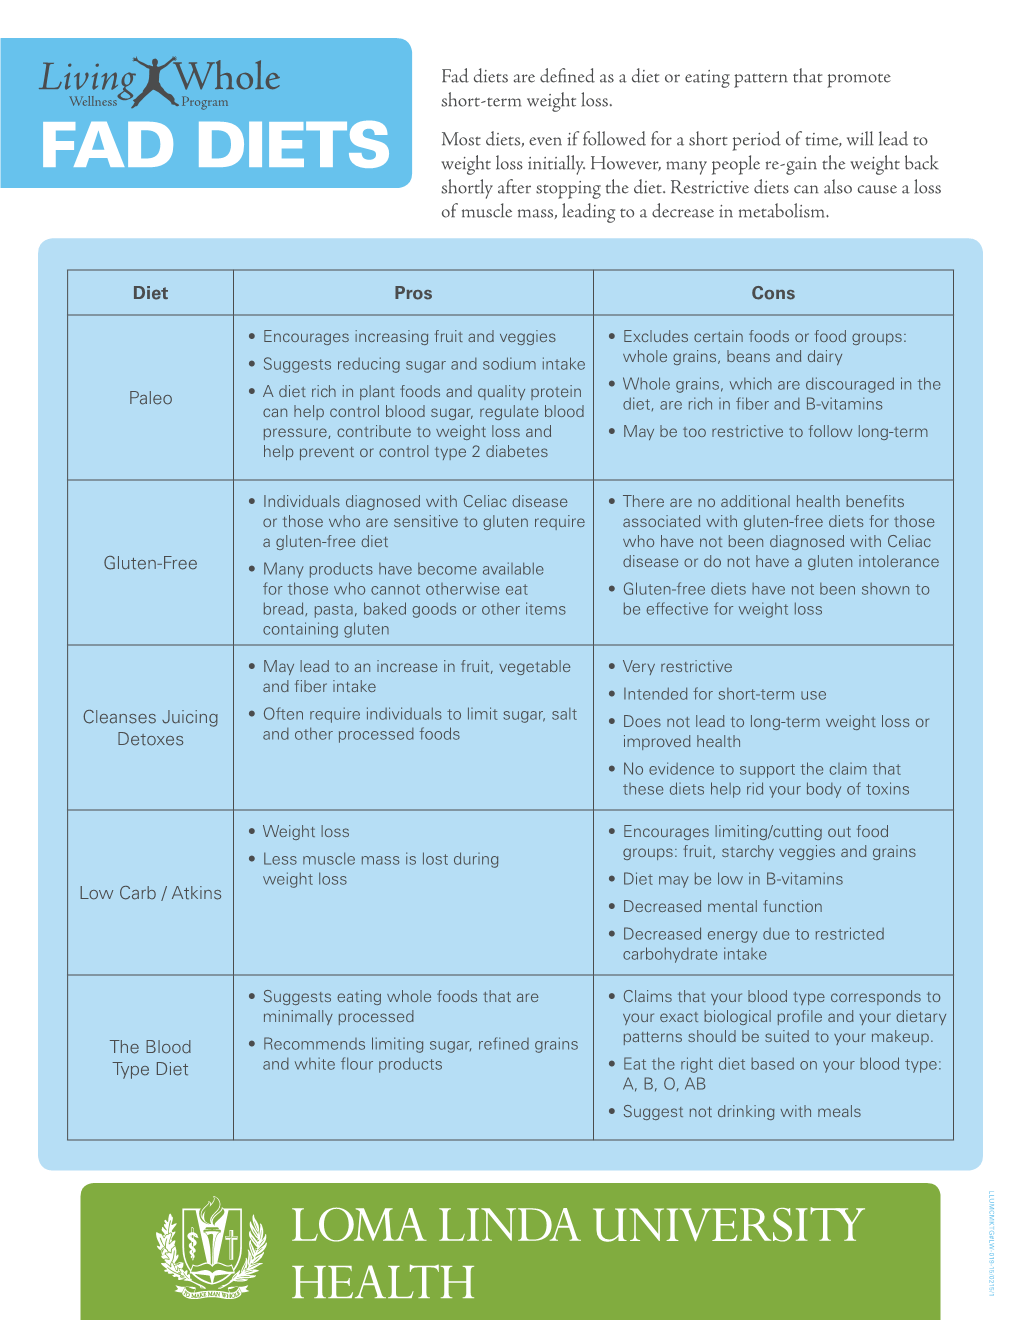 Fad Diets Are Defined As a Diet Or Eating Pattern That Promote Promote That Pattern Defined Or Eating As a Dietsdiet Are Fad Loss